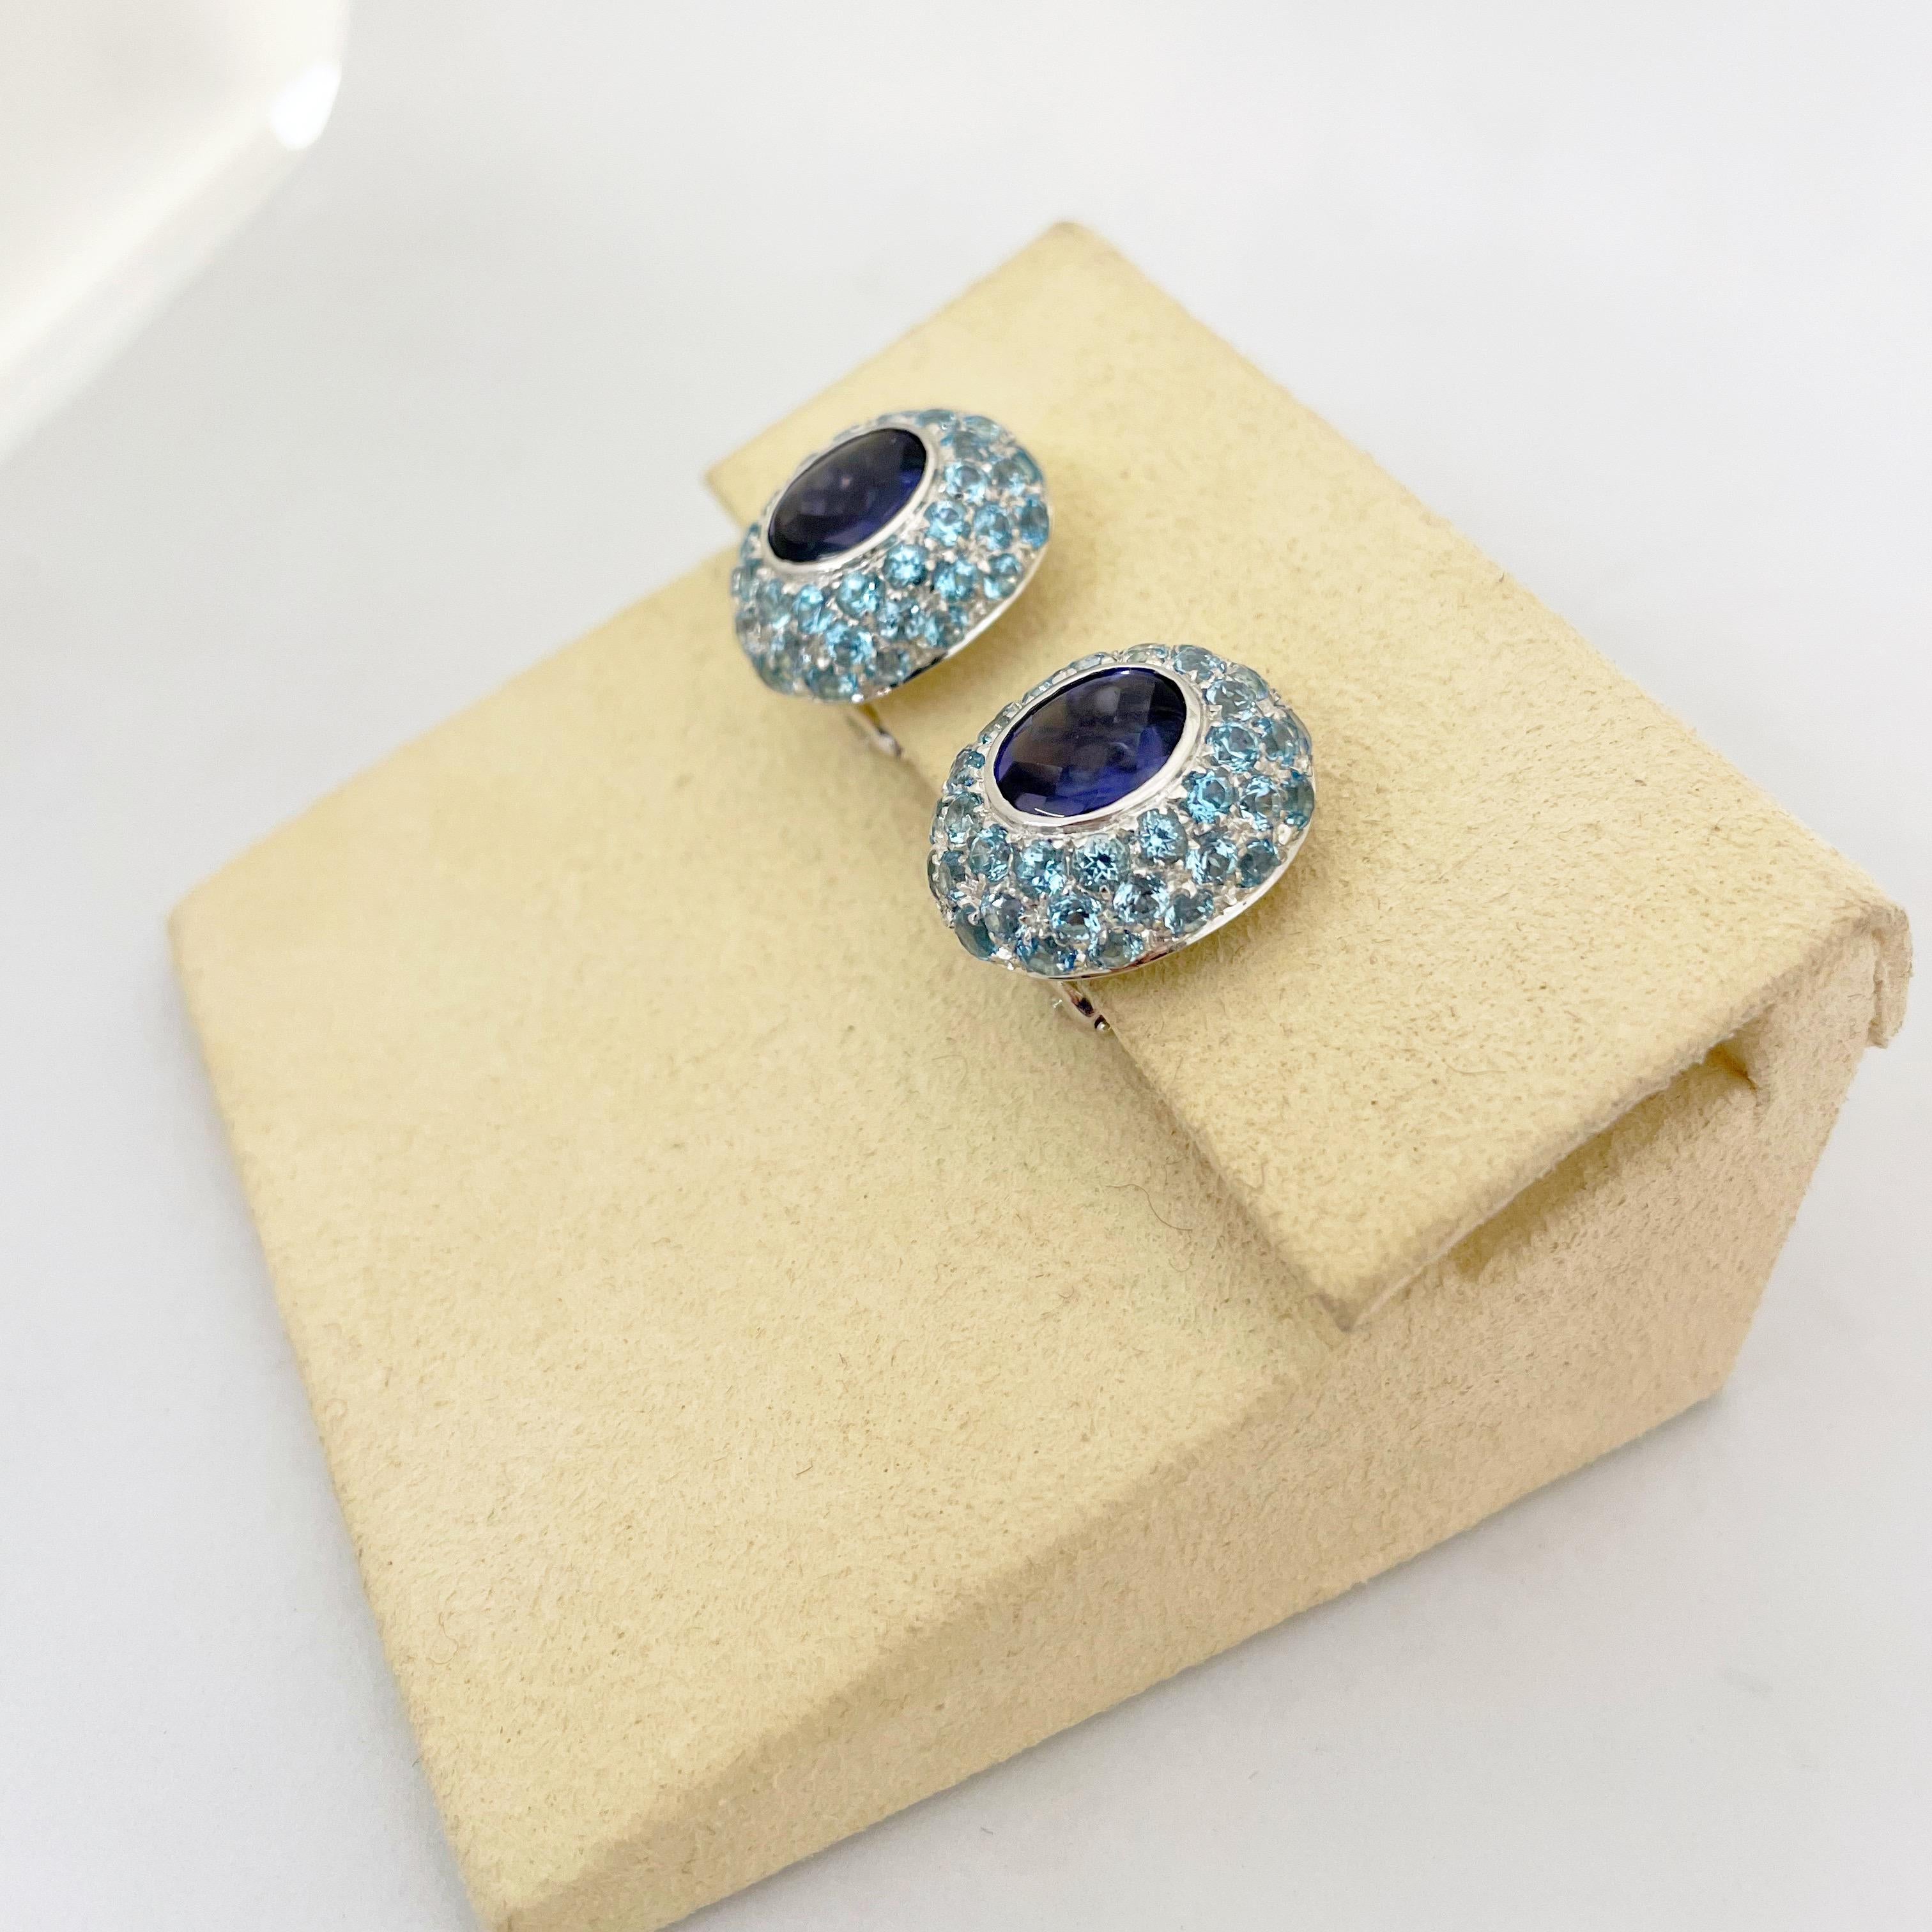 Italian Jewelers for more than three generations, VAID has produced merchandise exclusively for some of the most renowned jewelers across the world. These  VAID 18 KT white gold  button earrings are designed with oval  iolite centers surrounded by 